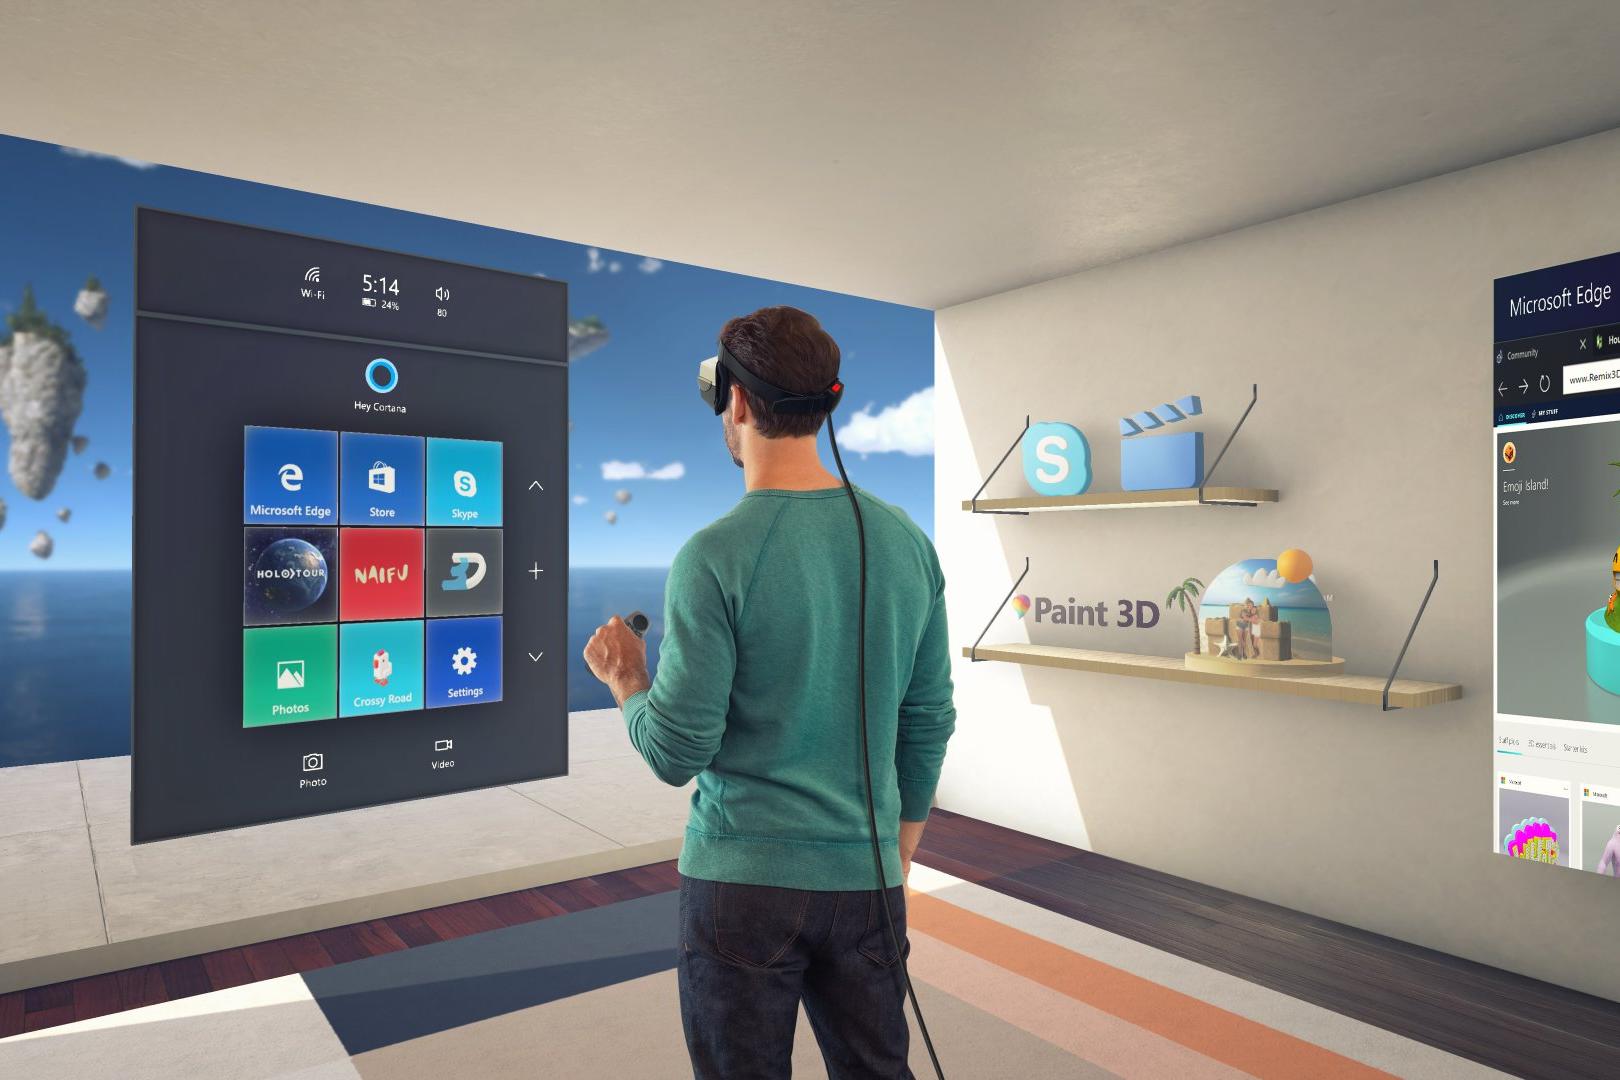 Microsoft removed Windows Mixed Reality feature from Windows